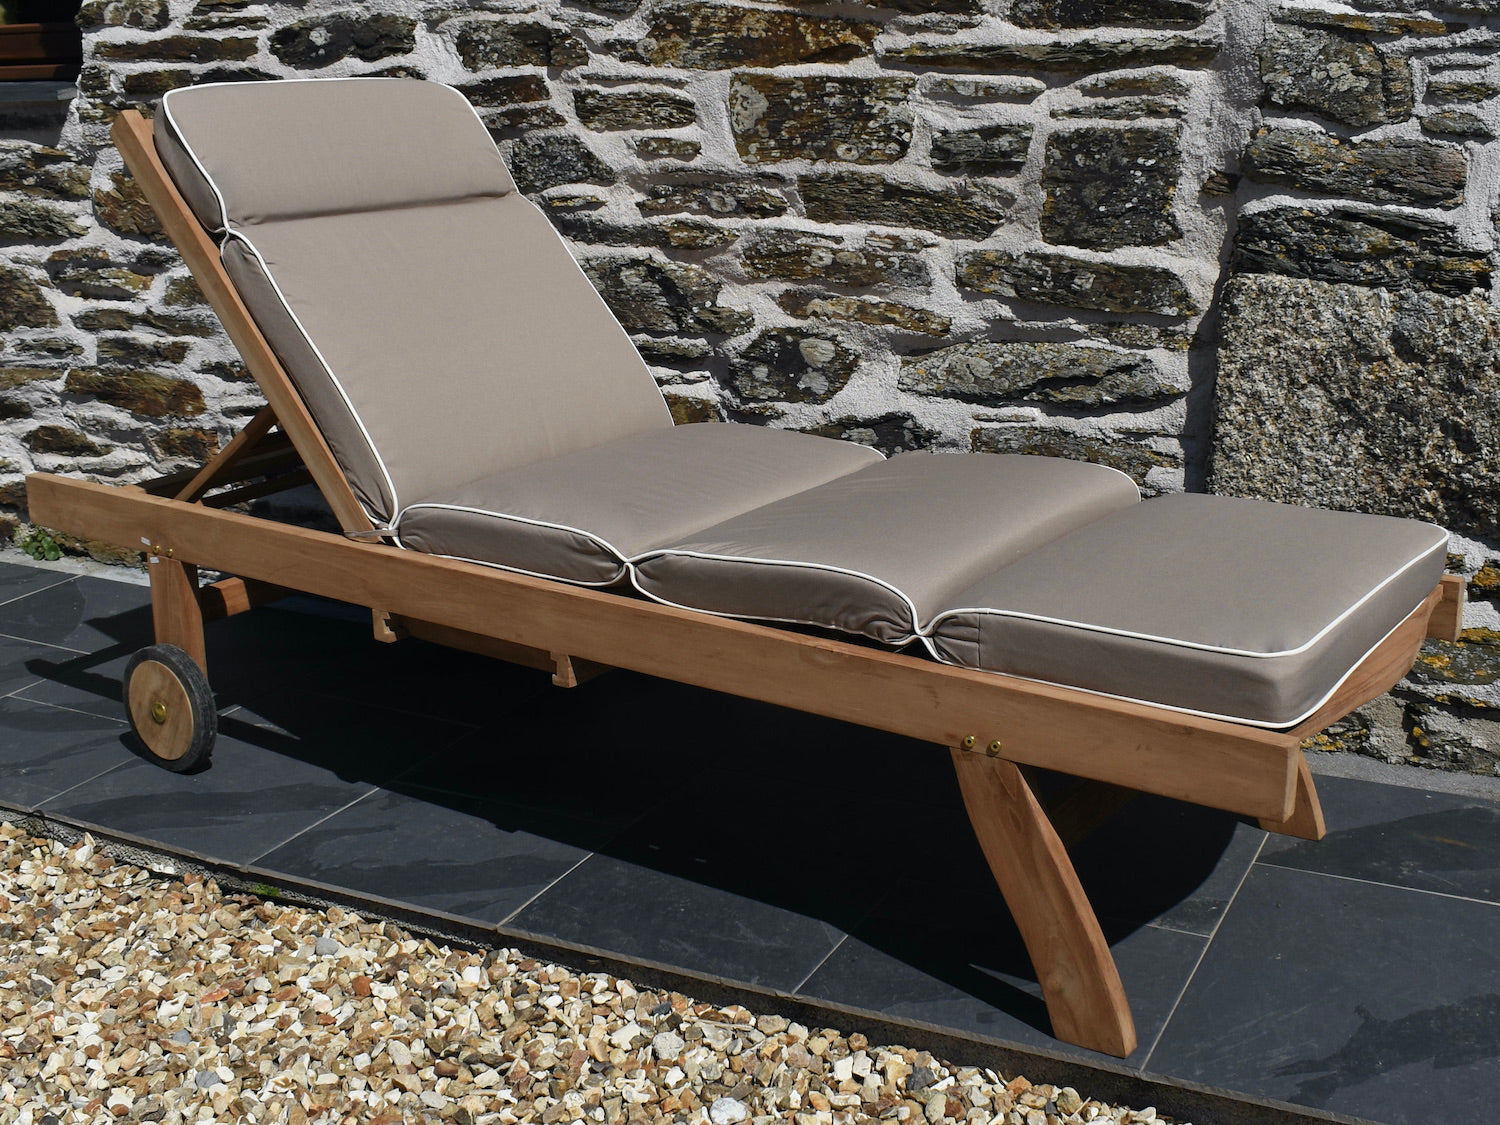 Luxury taupe colour traditional outdoor cushion for a garden sun lounger chair